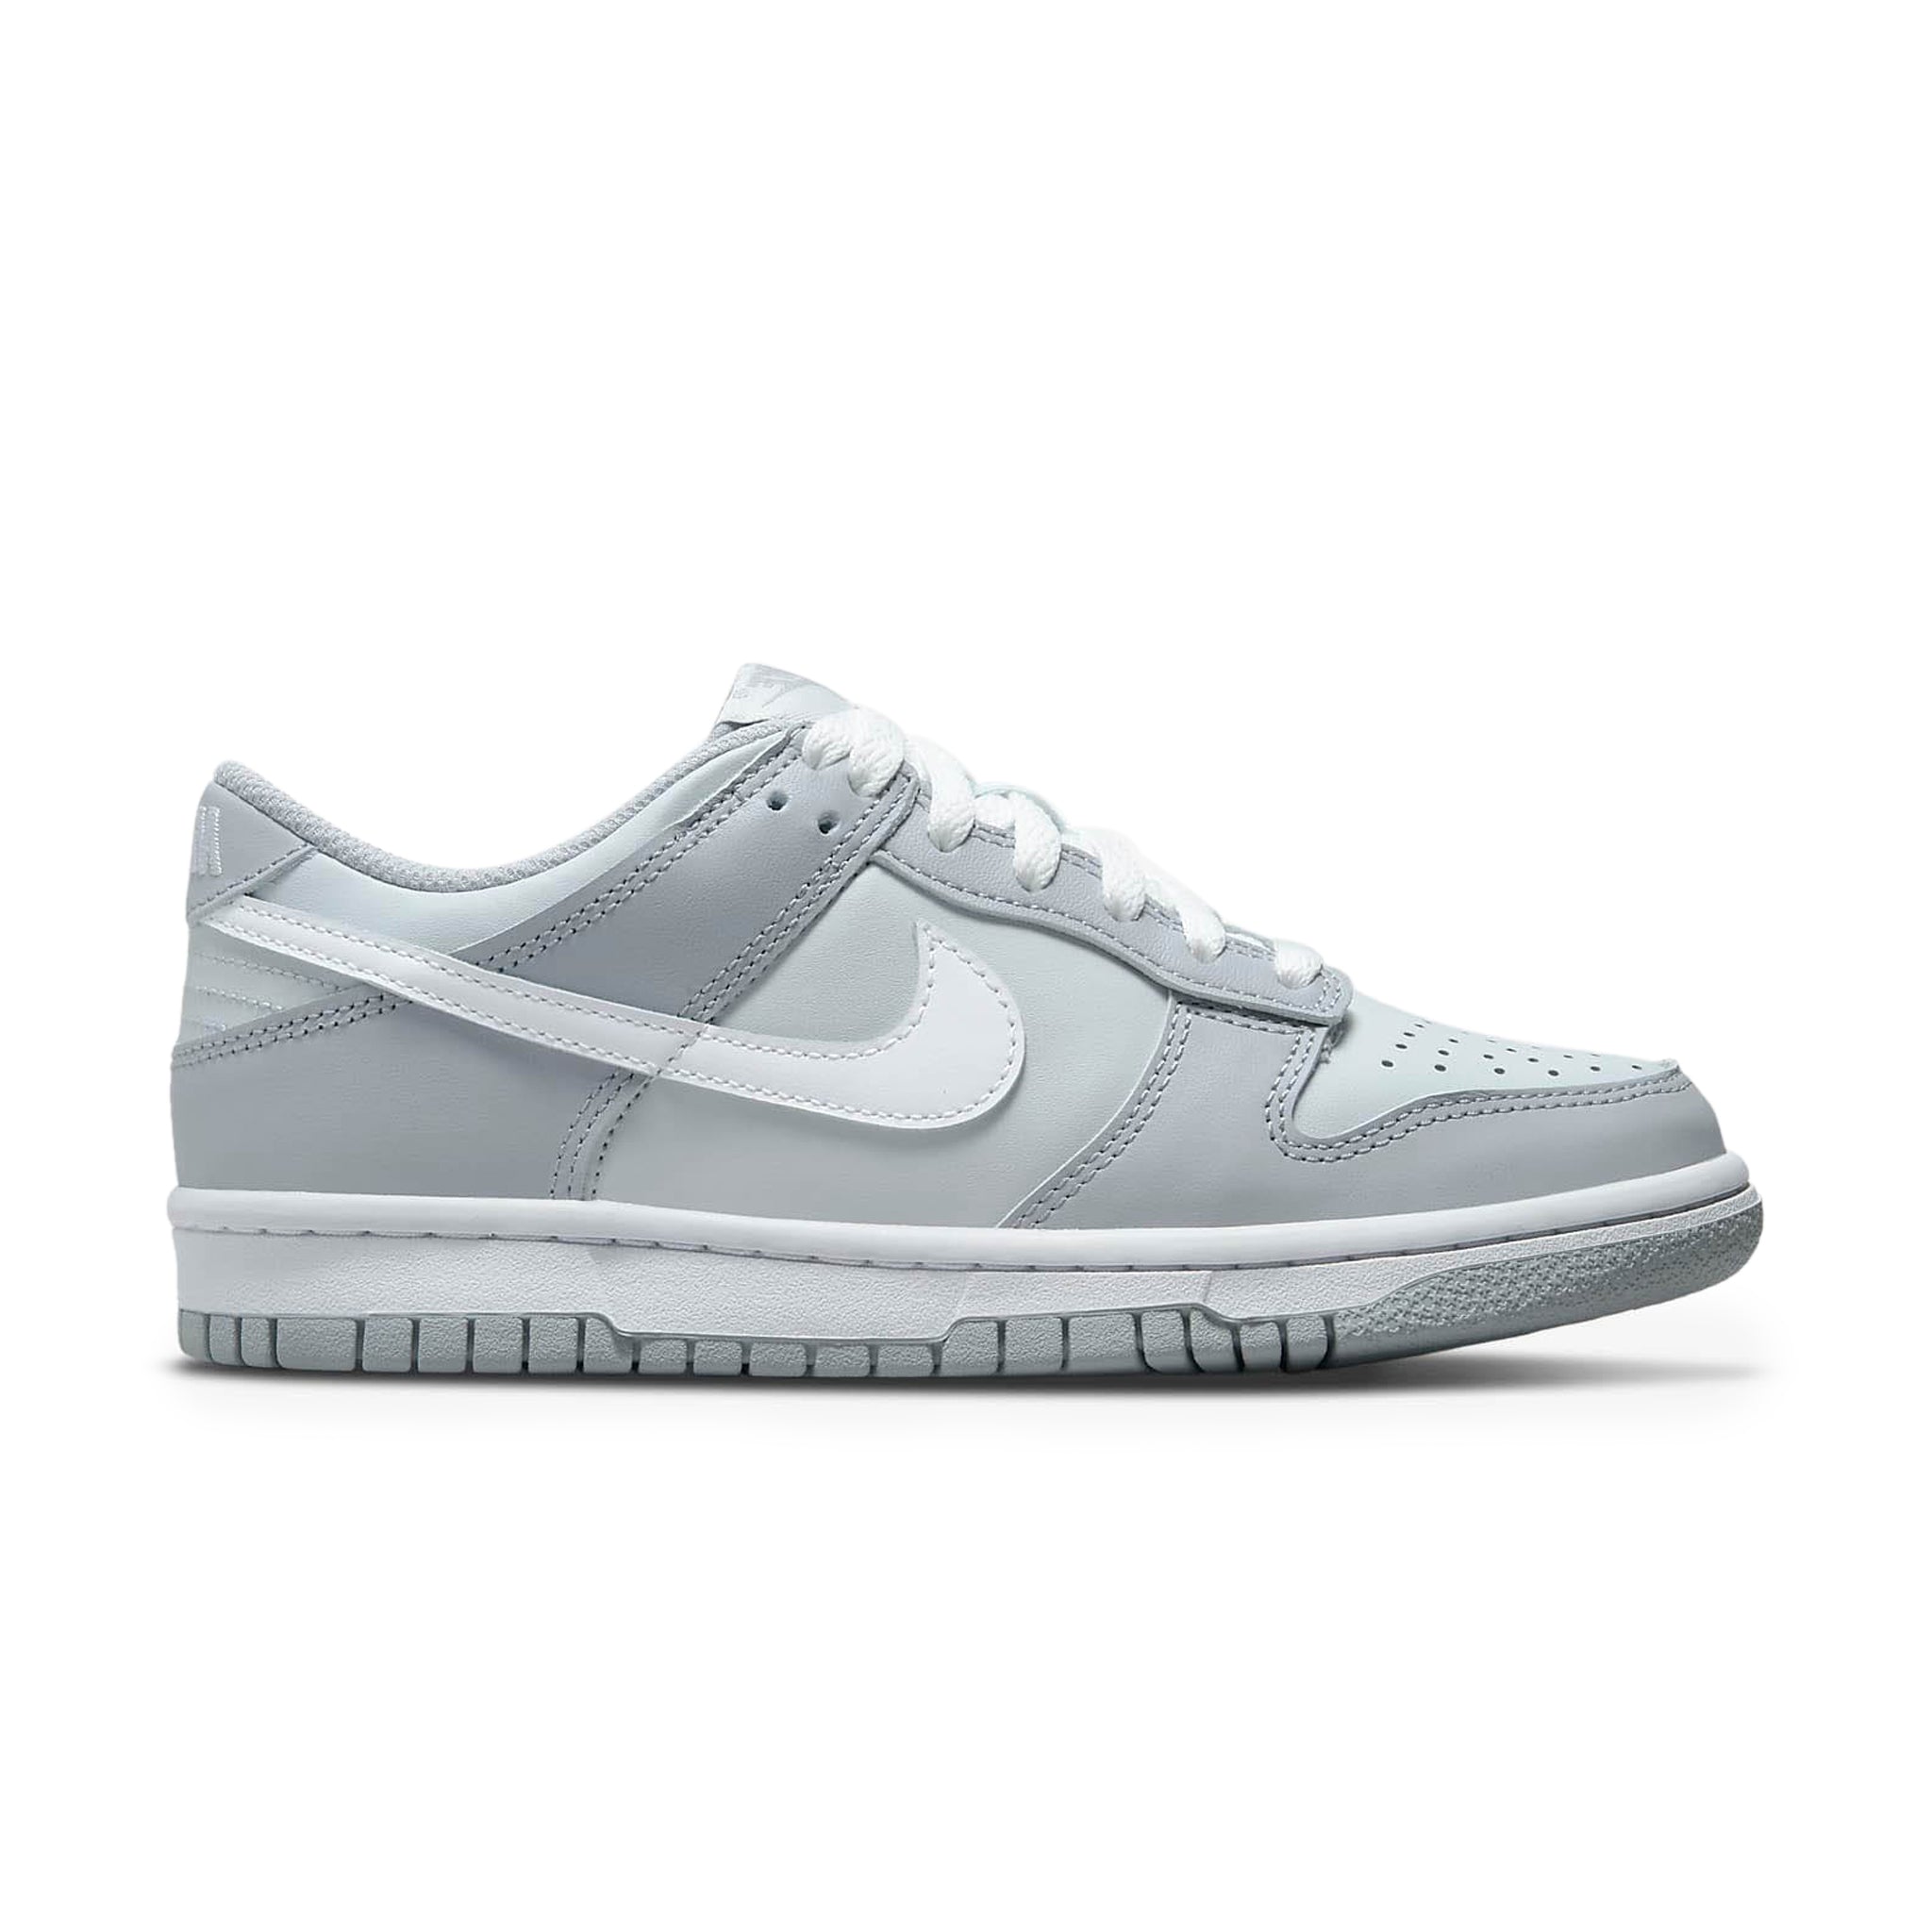 Side view of Oh no nike Two Toned Grey (GS) DH9765-001